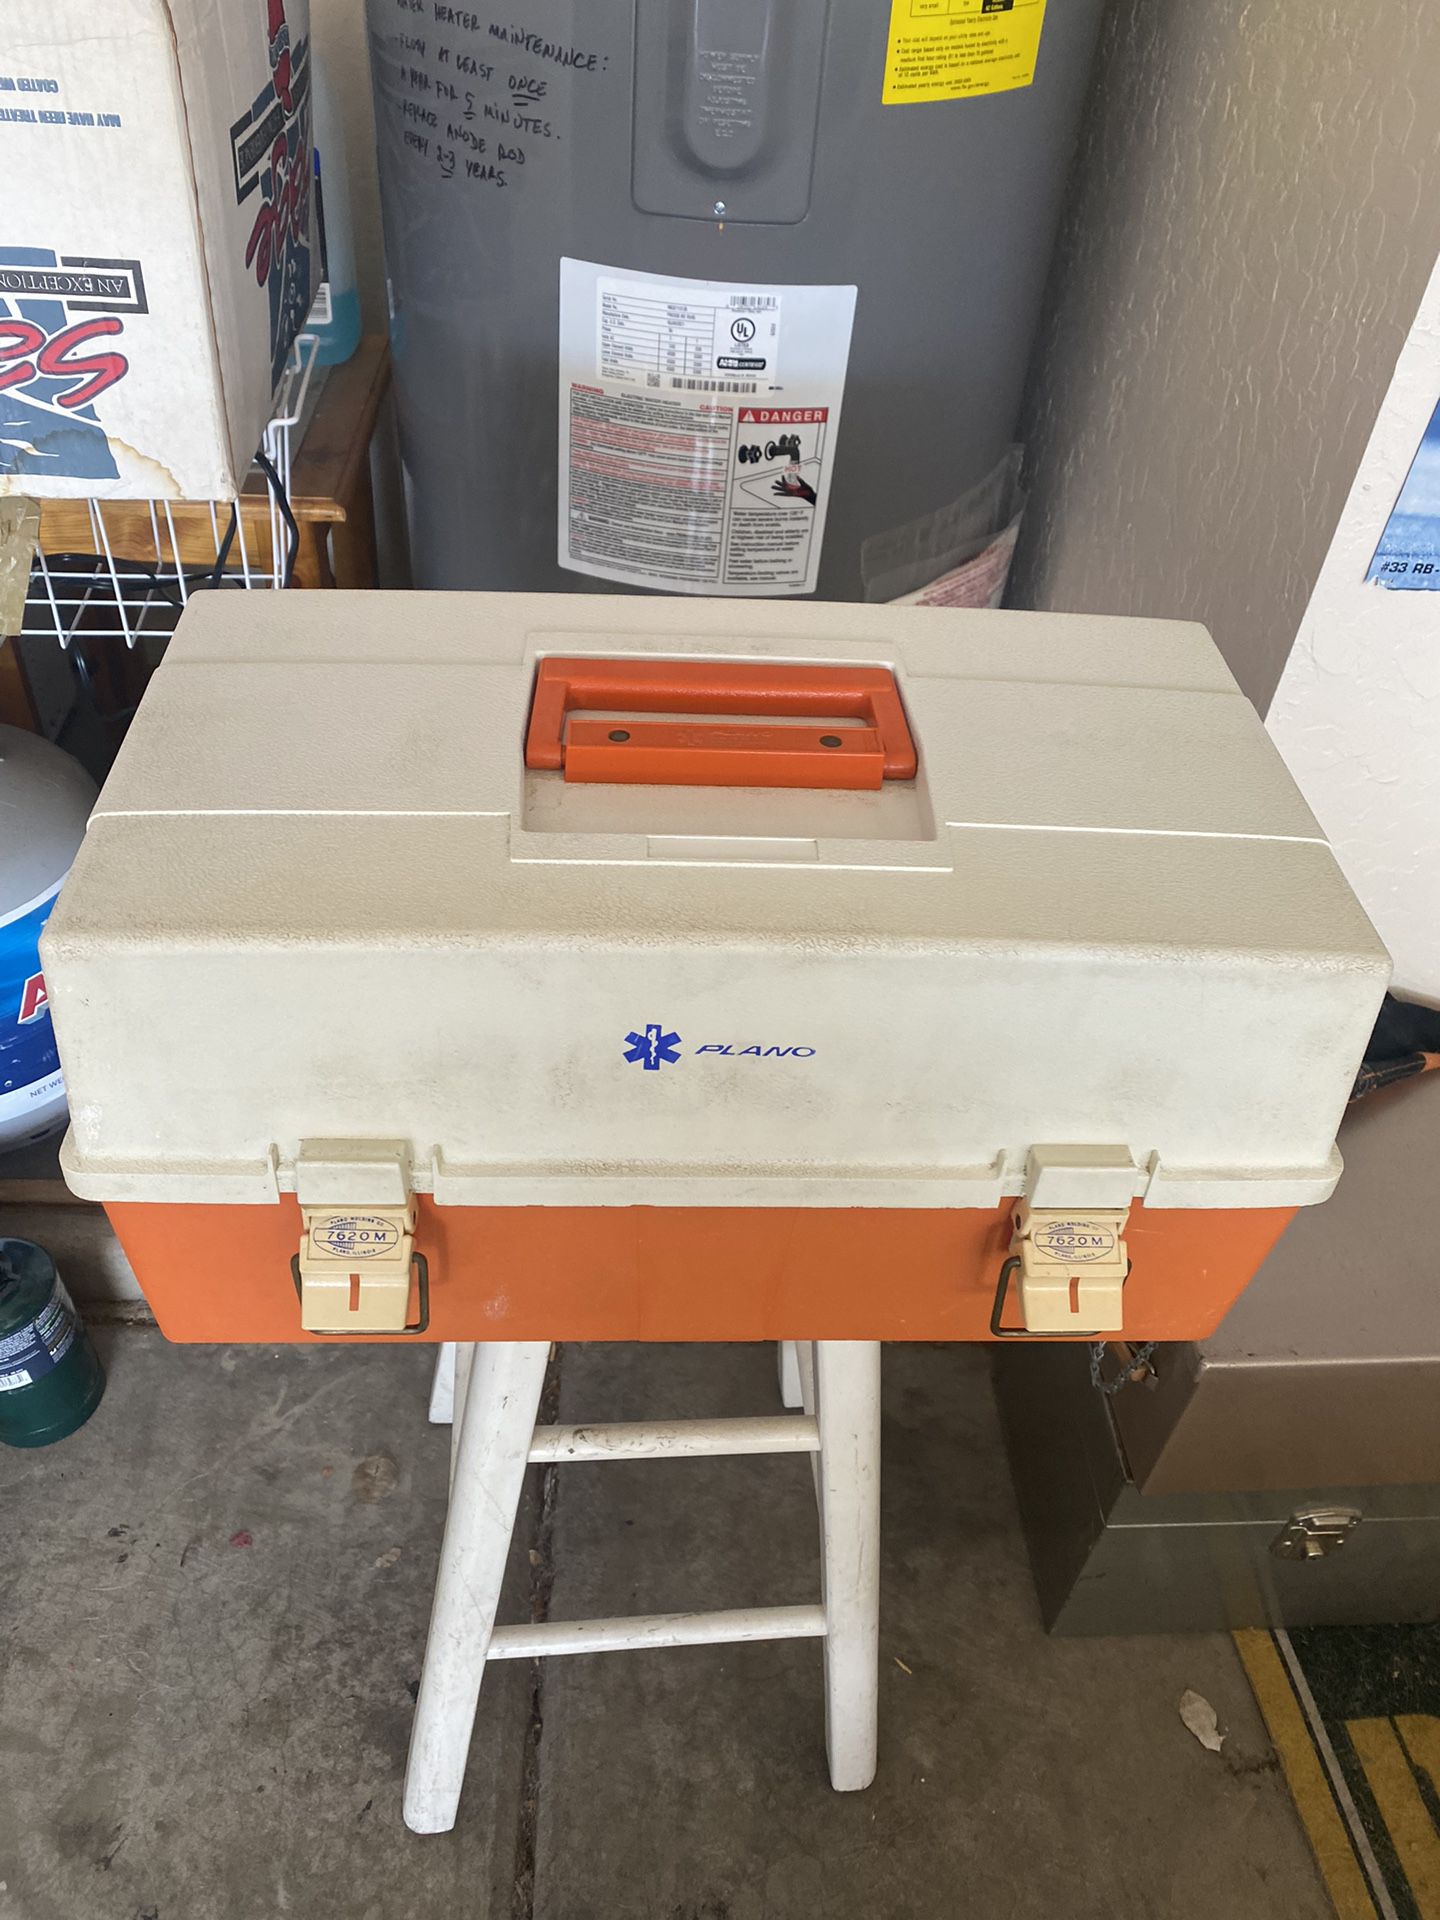 Large tackle Box for Sale in Tempe, AZ - OfferUp